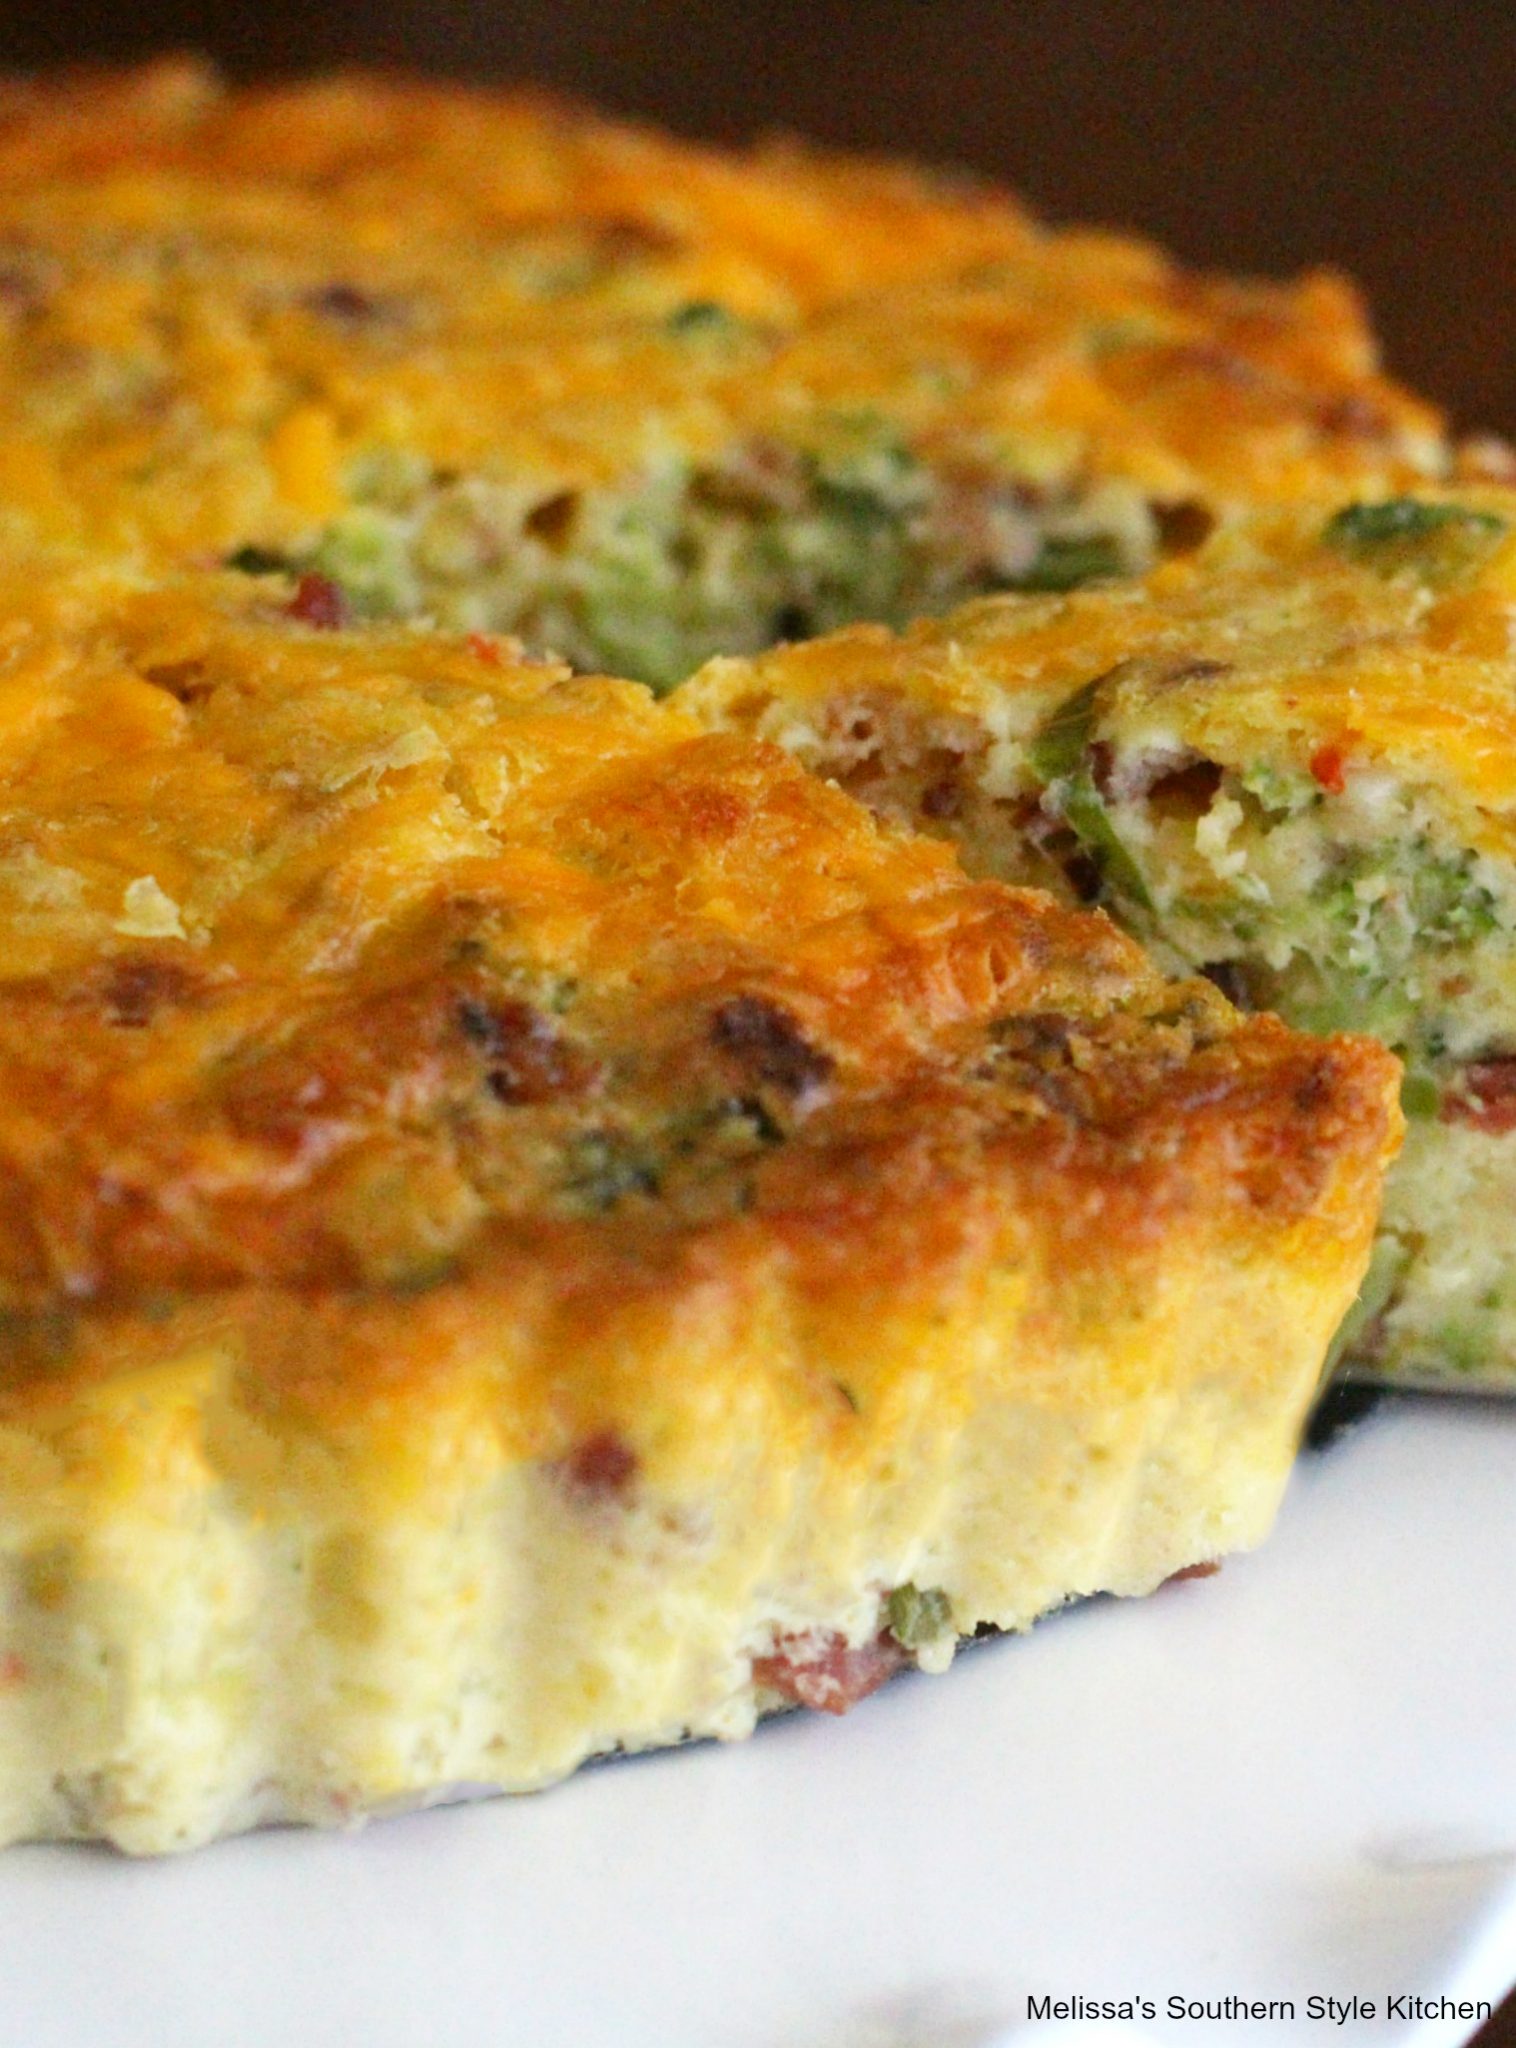 Broccoli Bacon Breakfast Quiche {Whole30} - Shuangy's Kitchensink